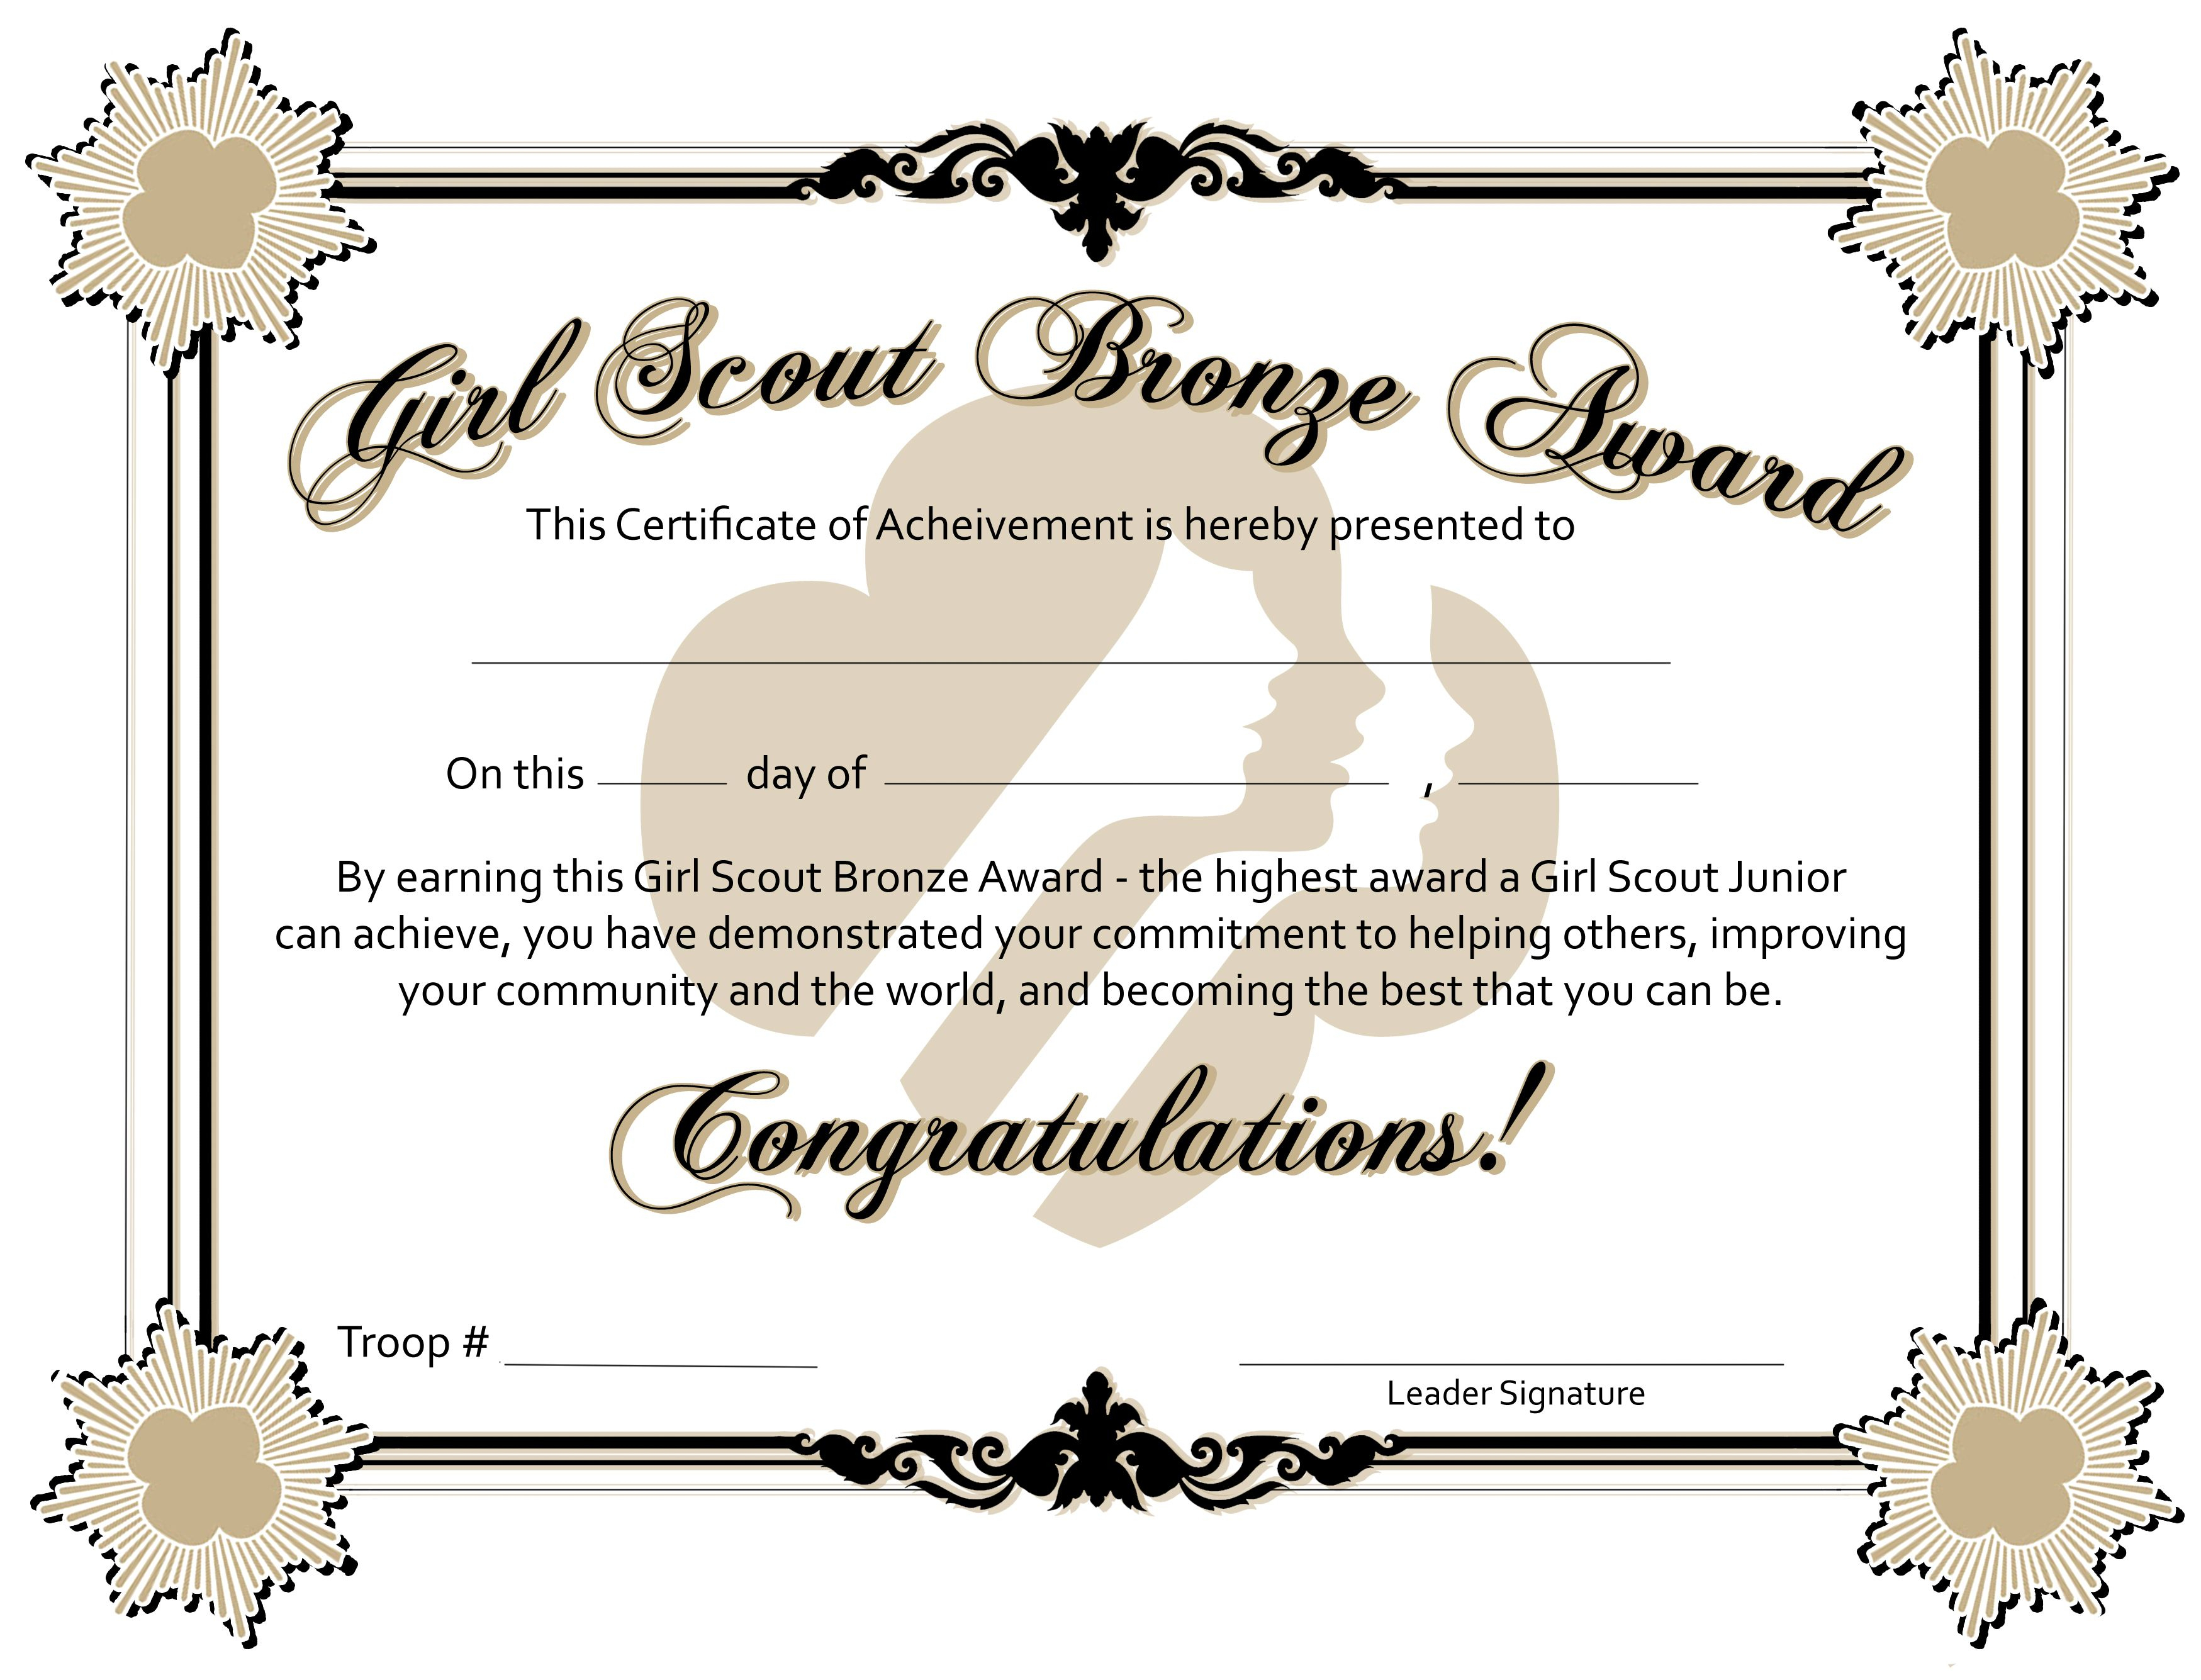 Girl Scout Bronze Award Certificate Printable - Google Search - Commitment Certificate Free Printable